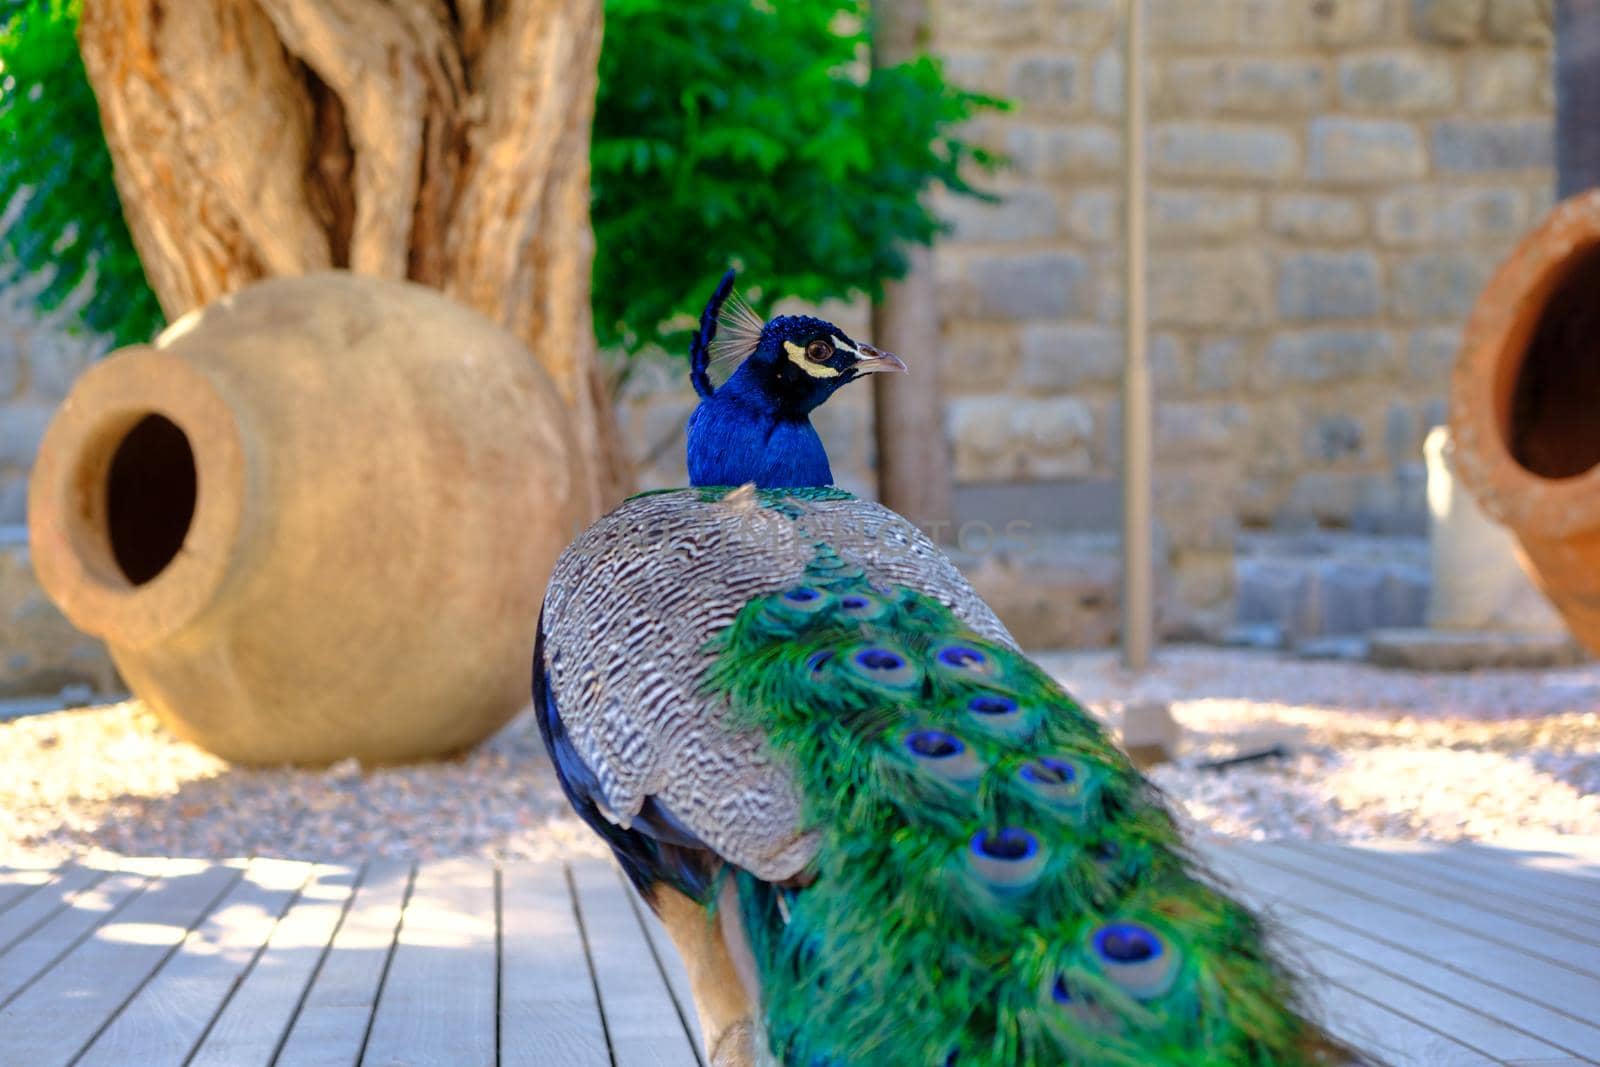 Peacock with feathers. Peacock in the garden with jag